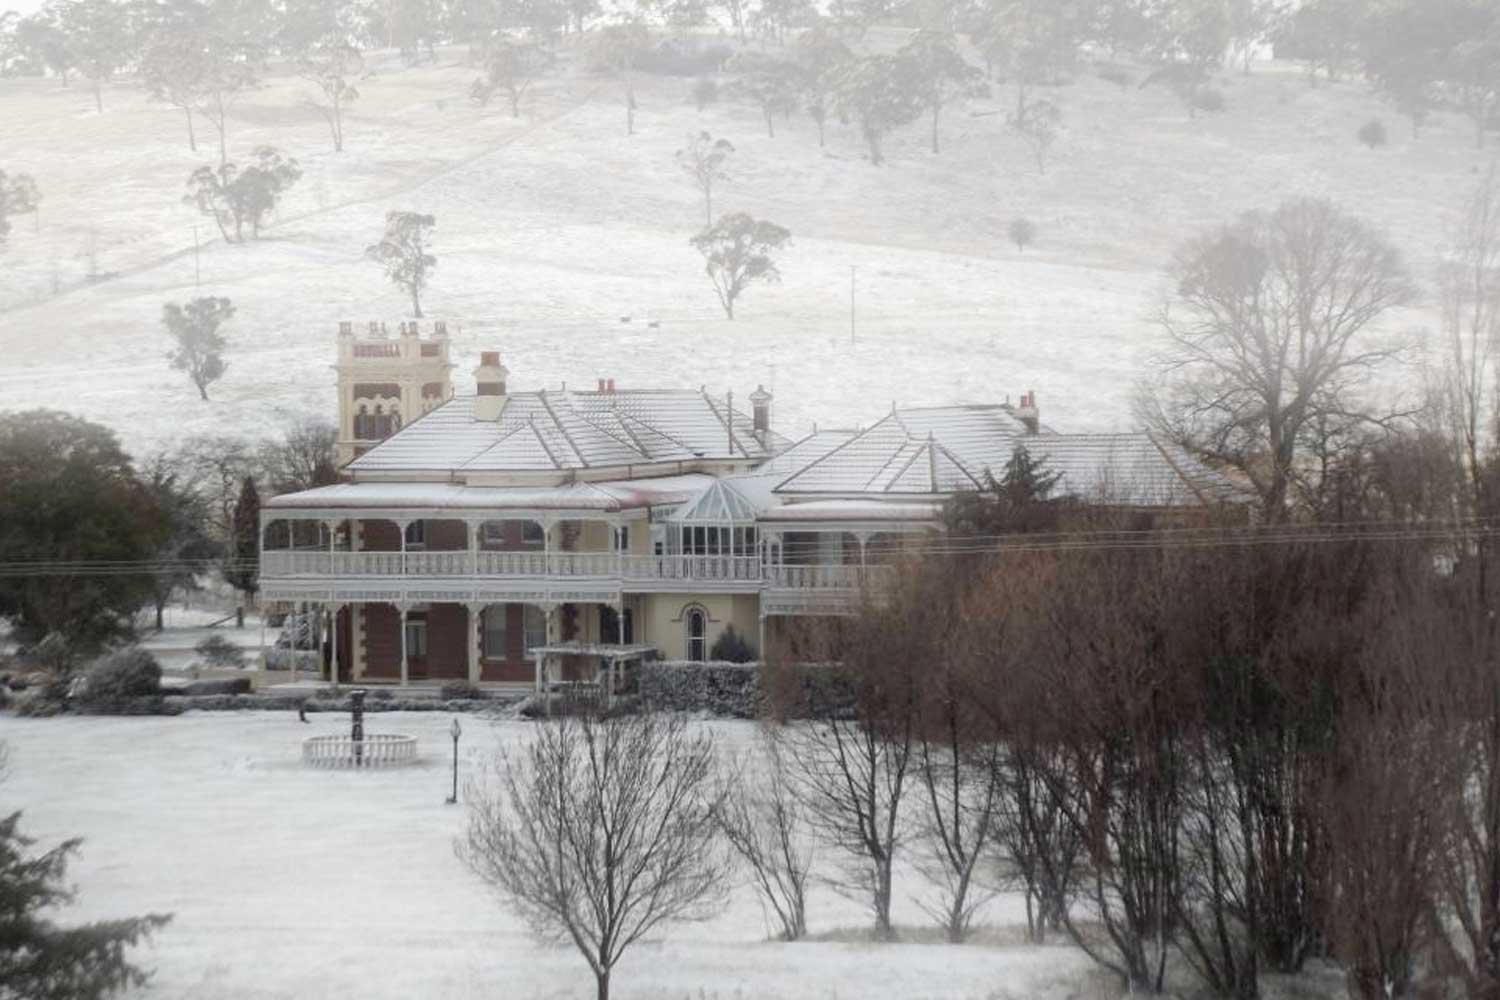 Langford House in Walcha surrounded by snowy grounds